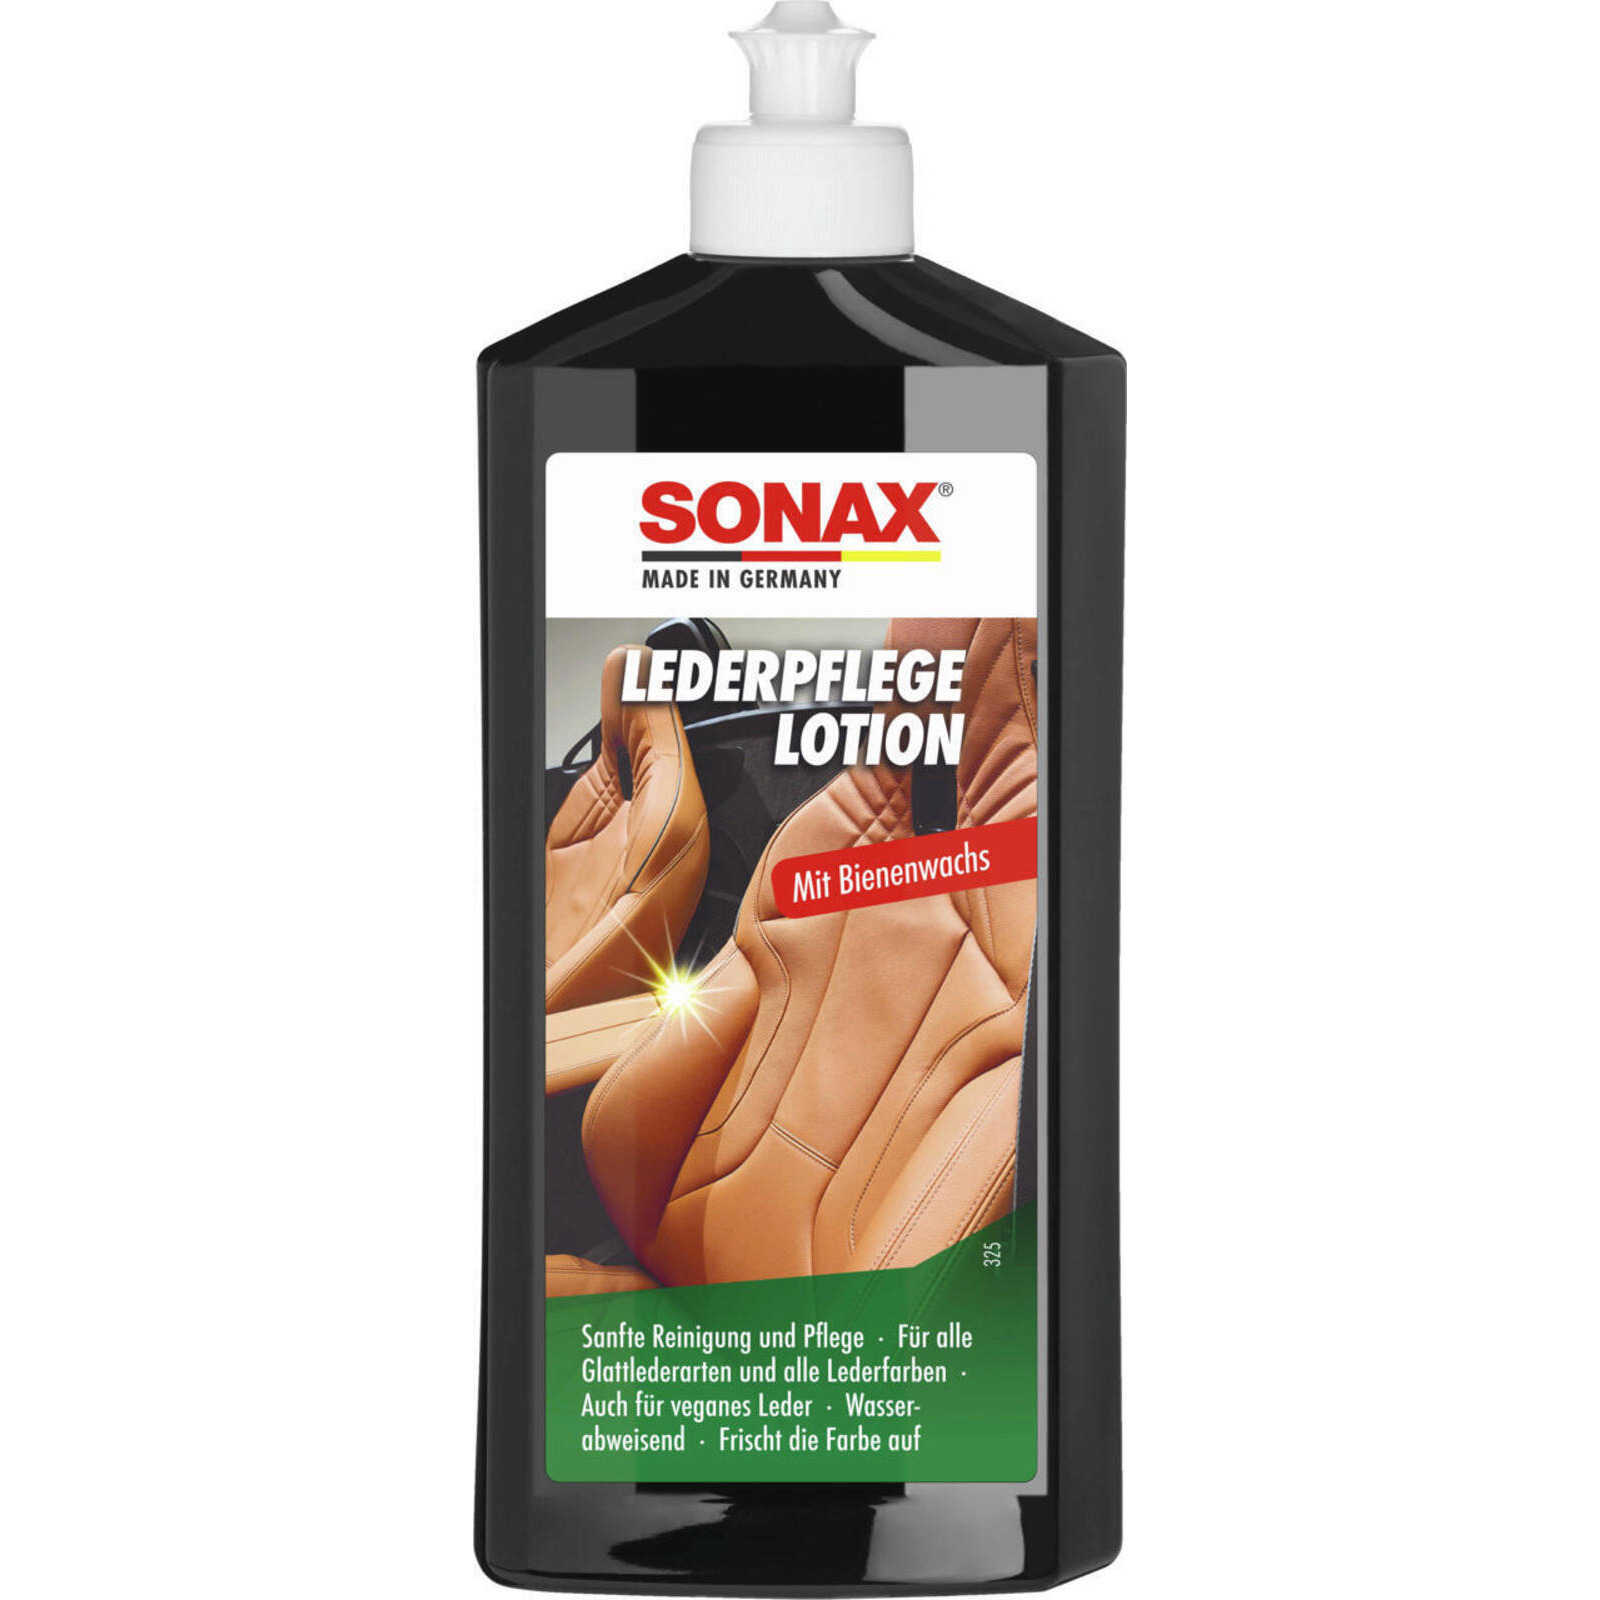 SONAX Leather Care Lotion Leather Care lotion